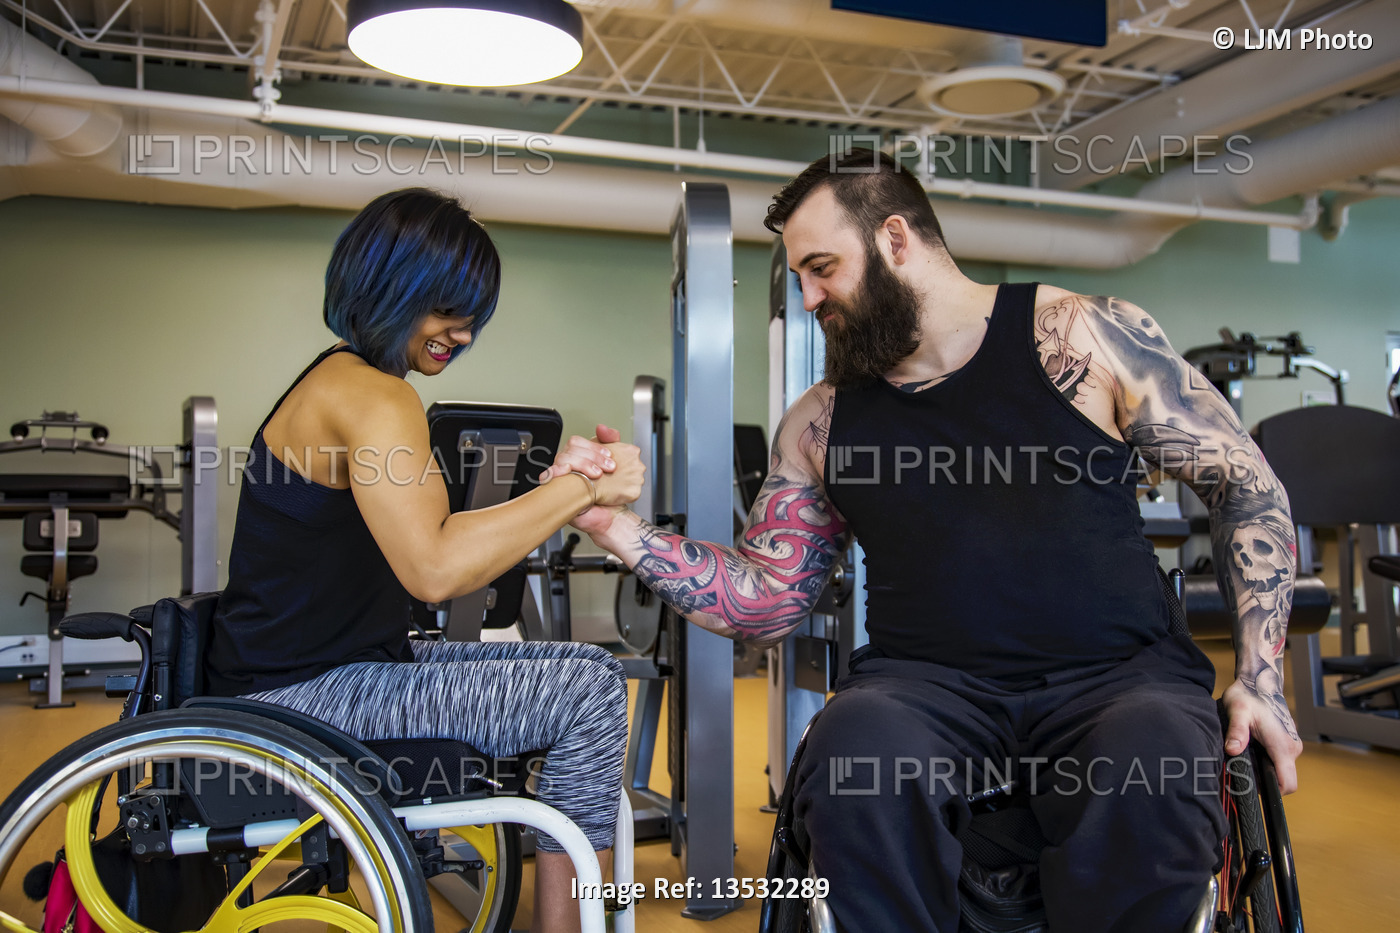 Two paraplegic friends pretending to arm wrestle after working out at a fitness ...